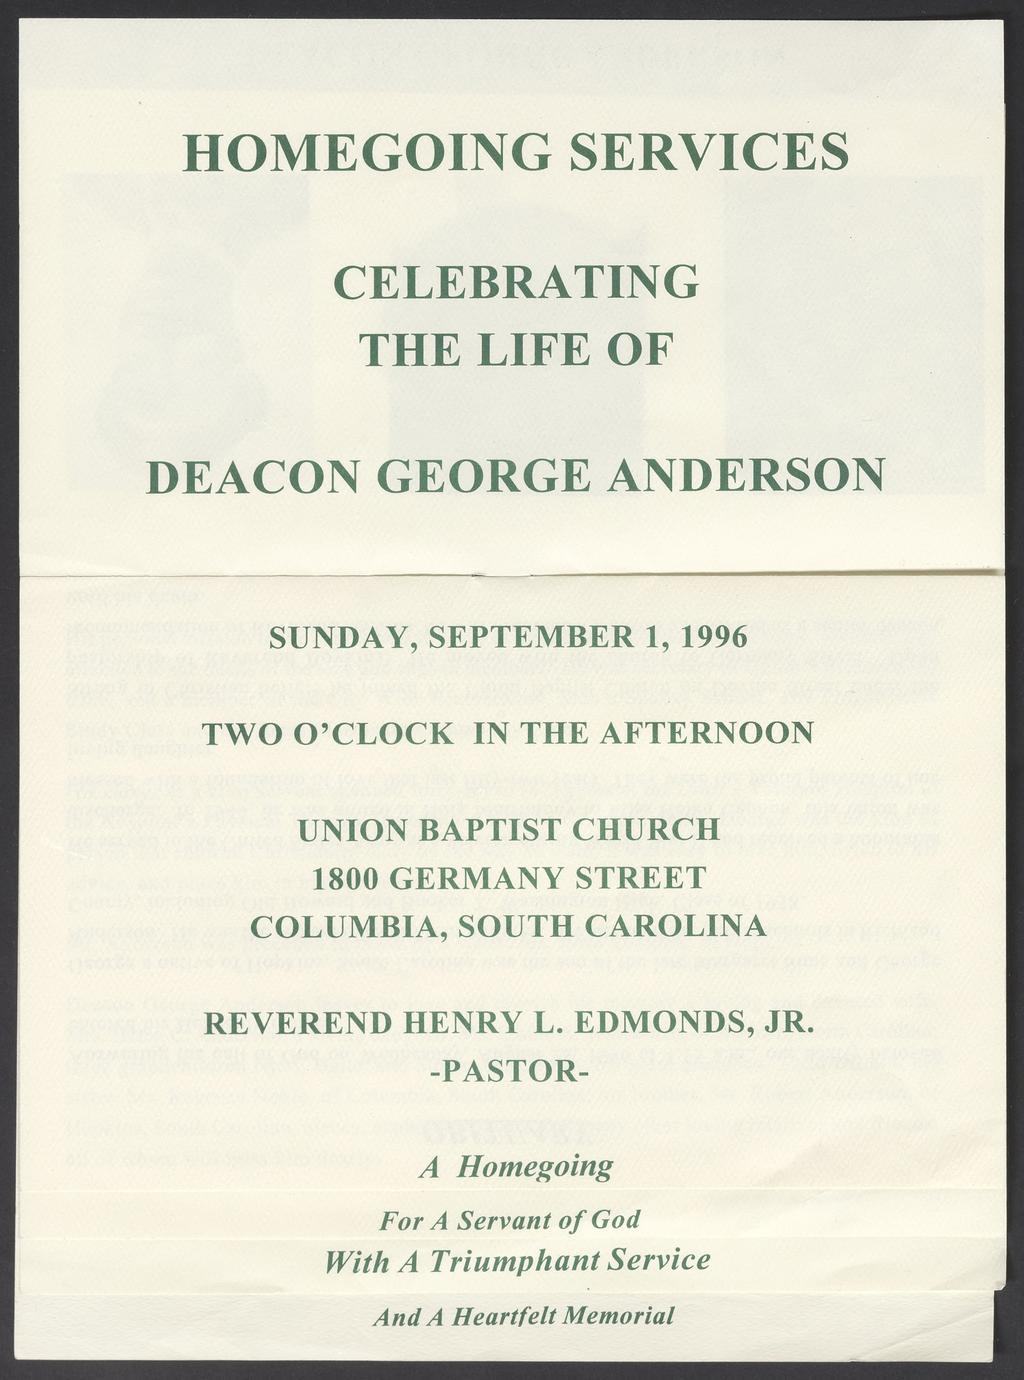 HOMEGOING SERVICES CELEBRATING THE LIFE OF DEACON GEORGE ANDERSON SUNDAY, SEPTEMBER 1, 1996 r TWO O CLOCK IN THE